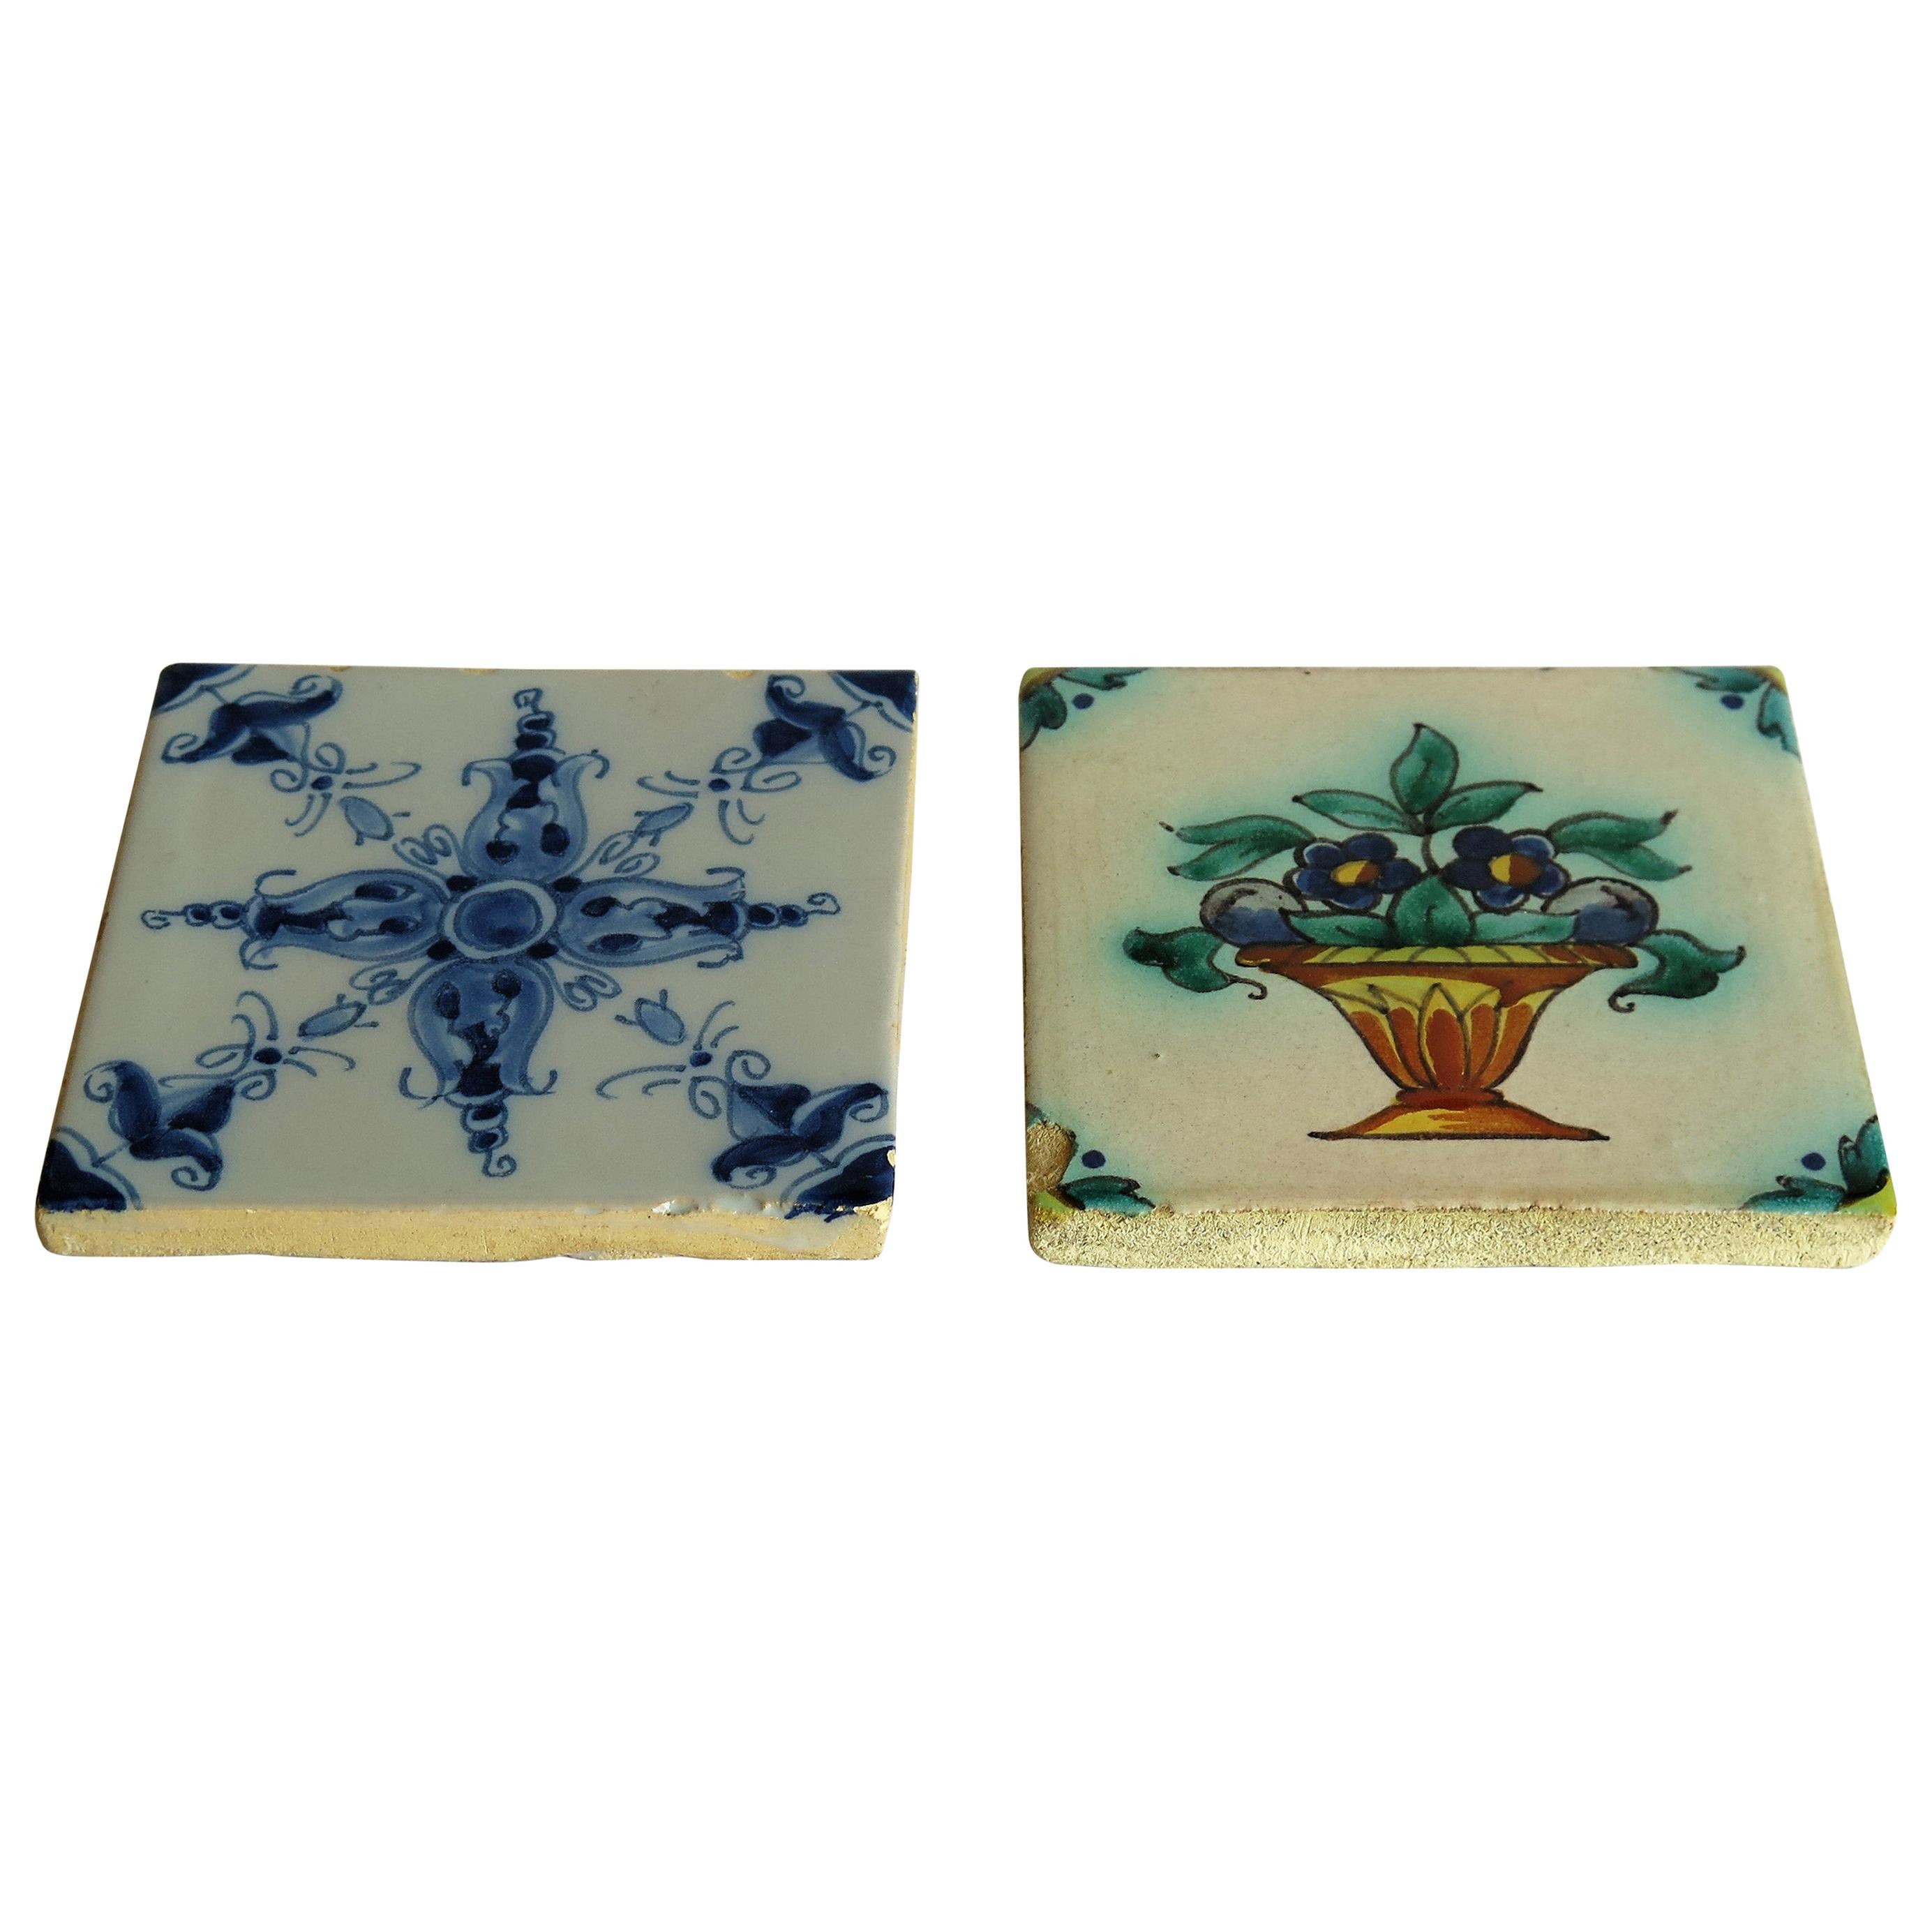 Two 19th Century Dutch Delft Ceramic Wall Tiles Hand Painted Floral Patterns